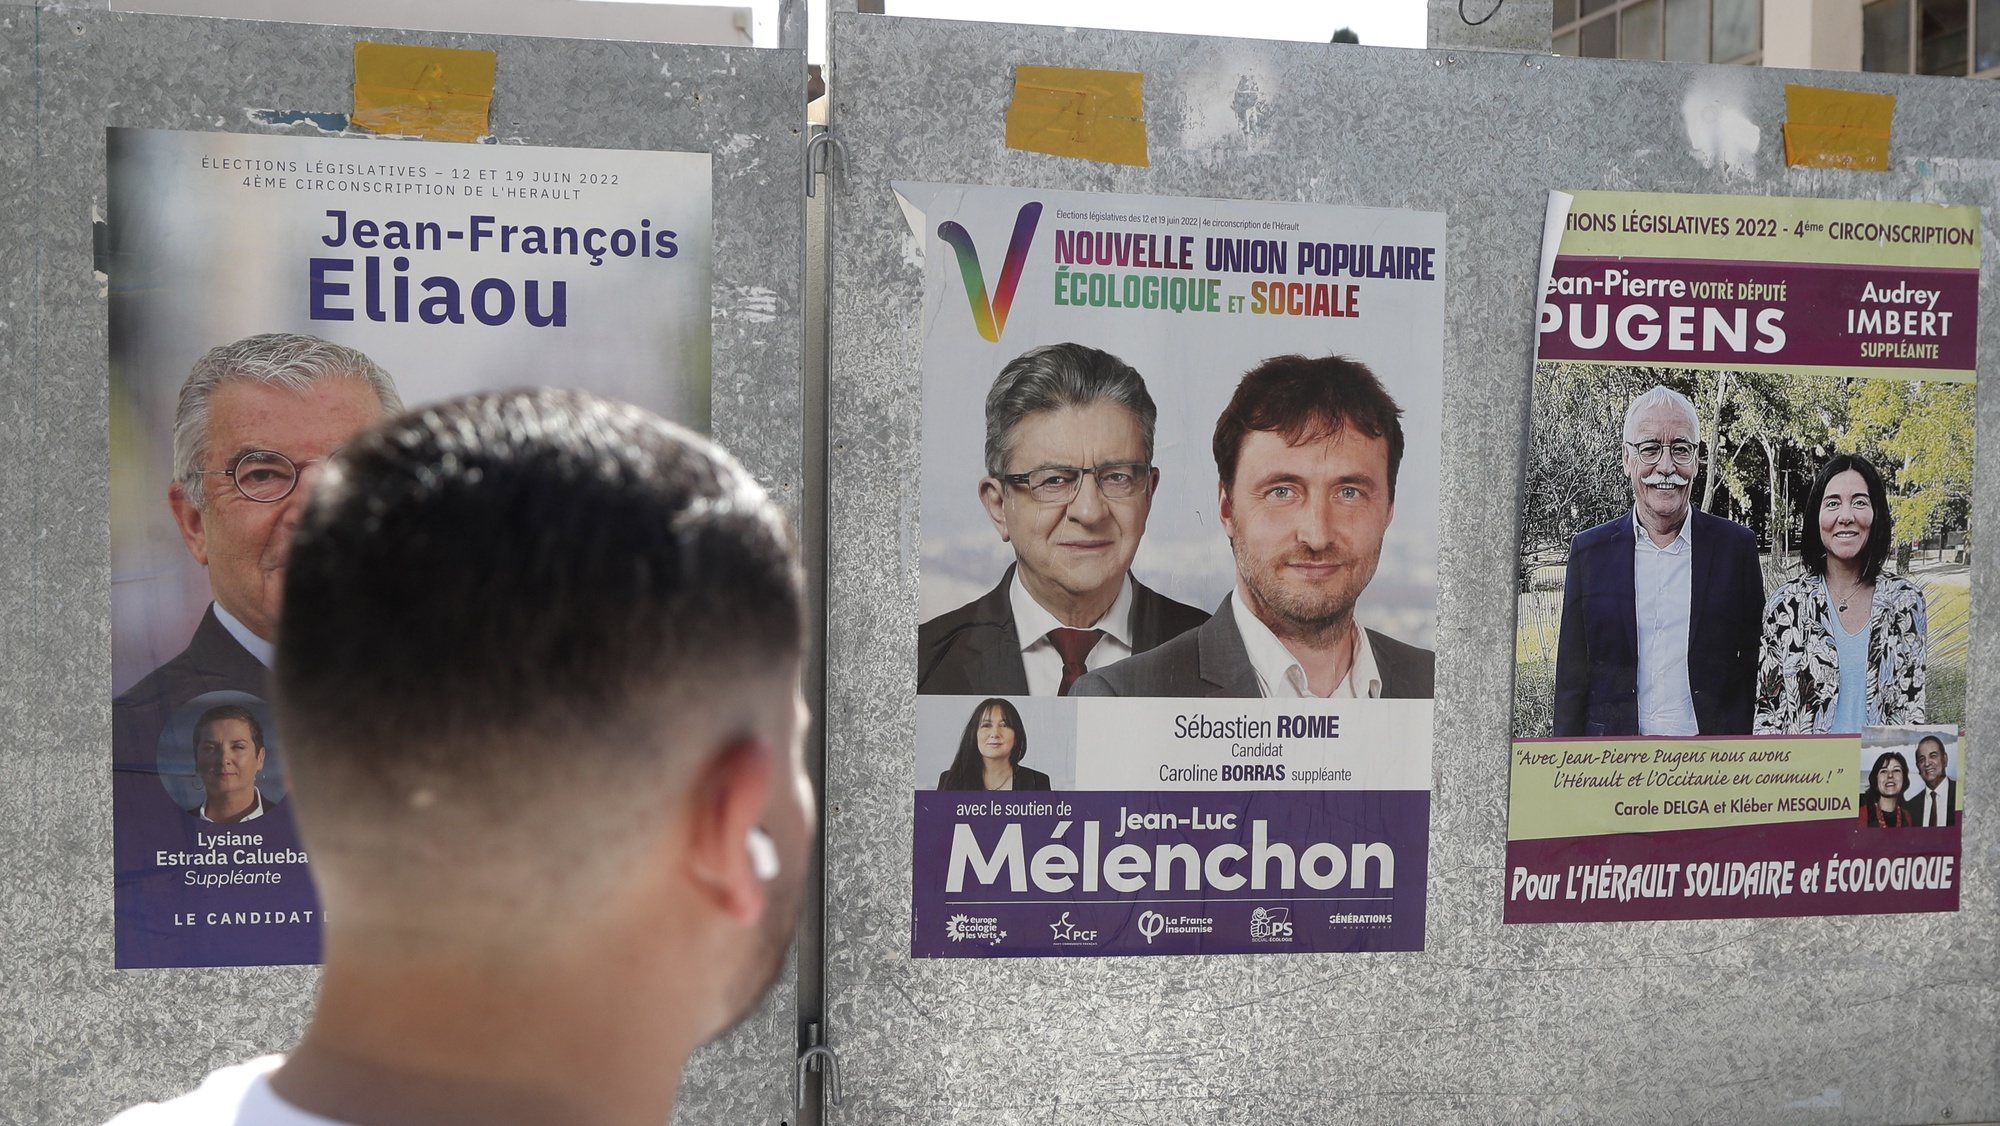 epa10014669 A man looks at legislative election posters in Gignac, France, 15 June 2022. The legislative elections will be held on 12 and 19 June 2022 to elect the 577 members for the National Assembly of the French Republic.  EPA/GUILLAUME HORCAJUELO